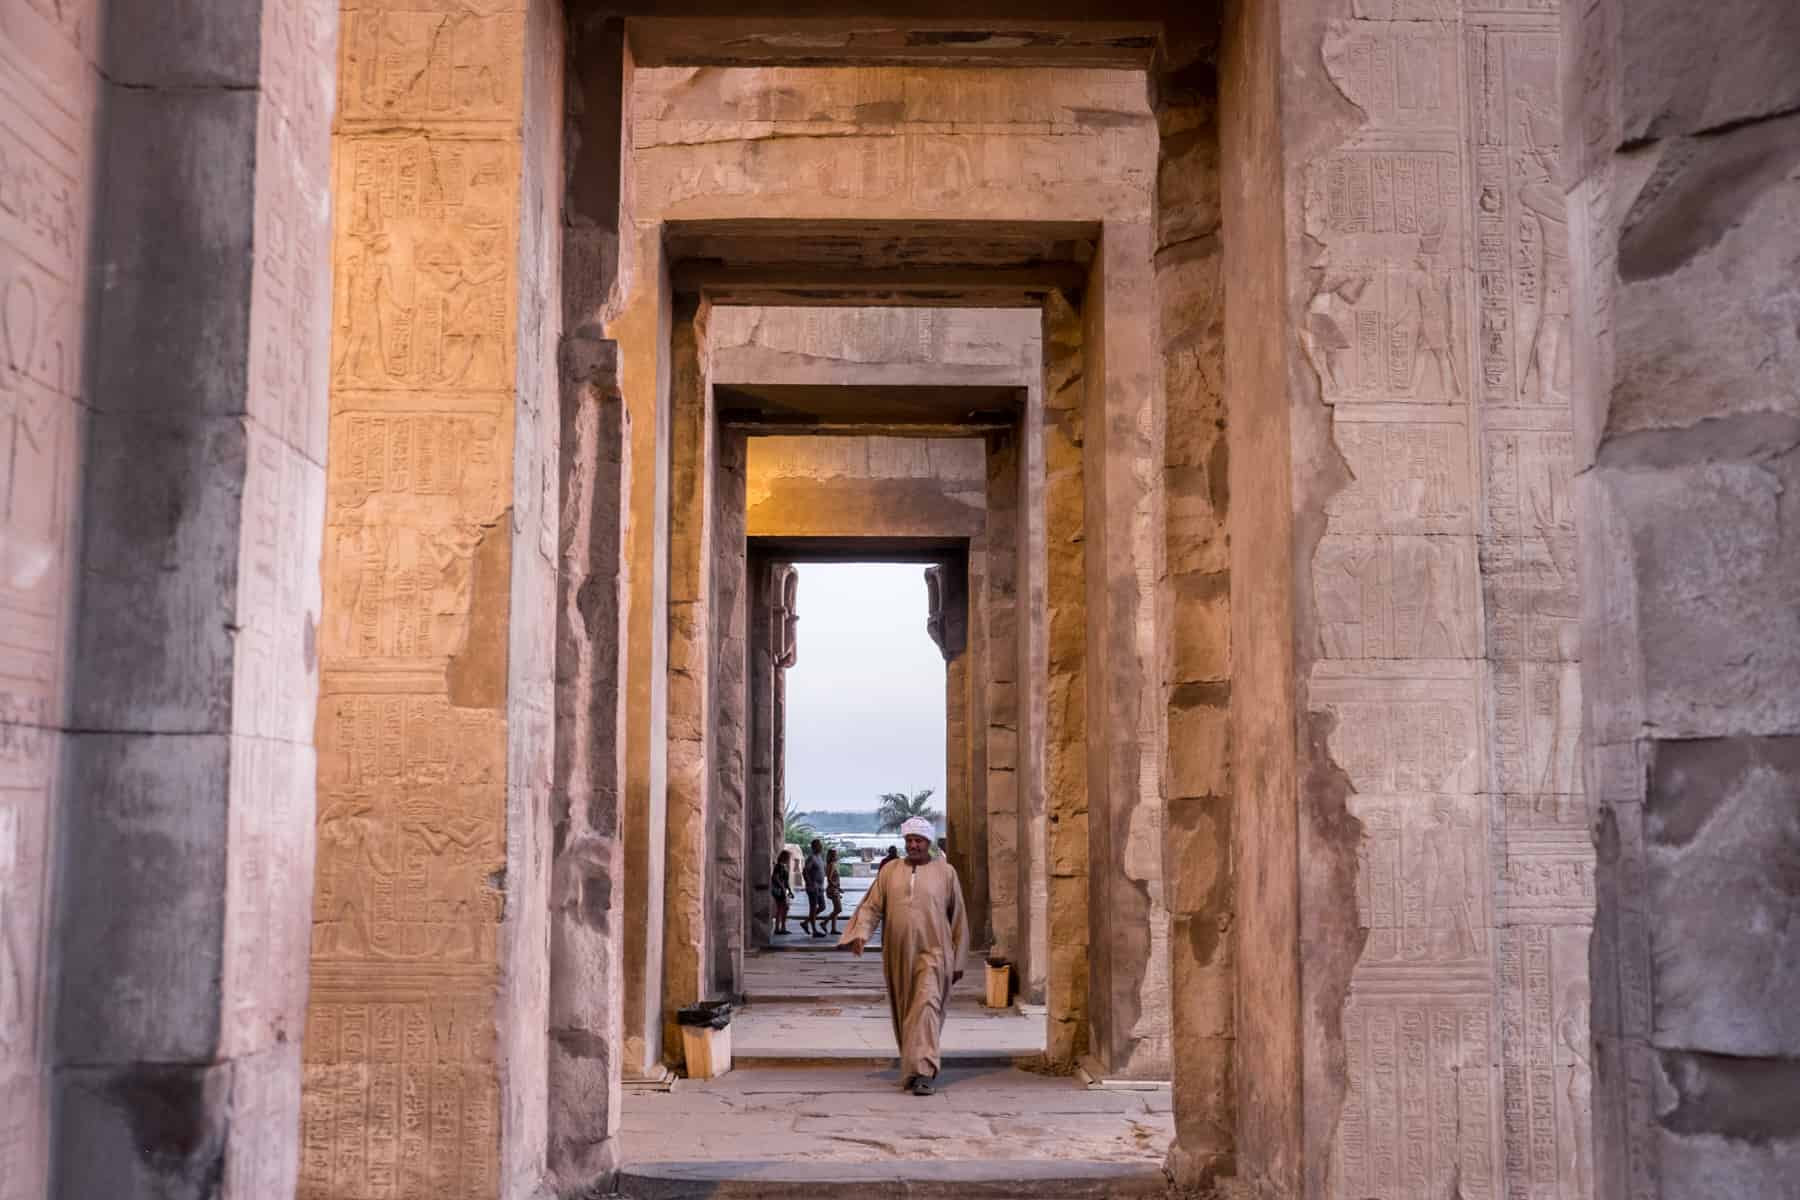 An Egyptian Guard in a white tunic walks through the square stoned corridor of Kom Ombo temple at sunset, that sets the temple in an orange glow